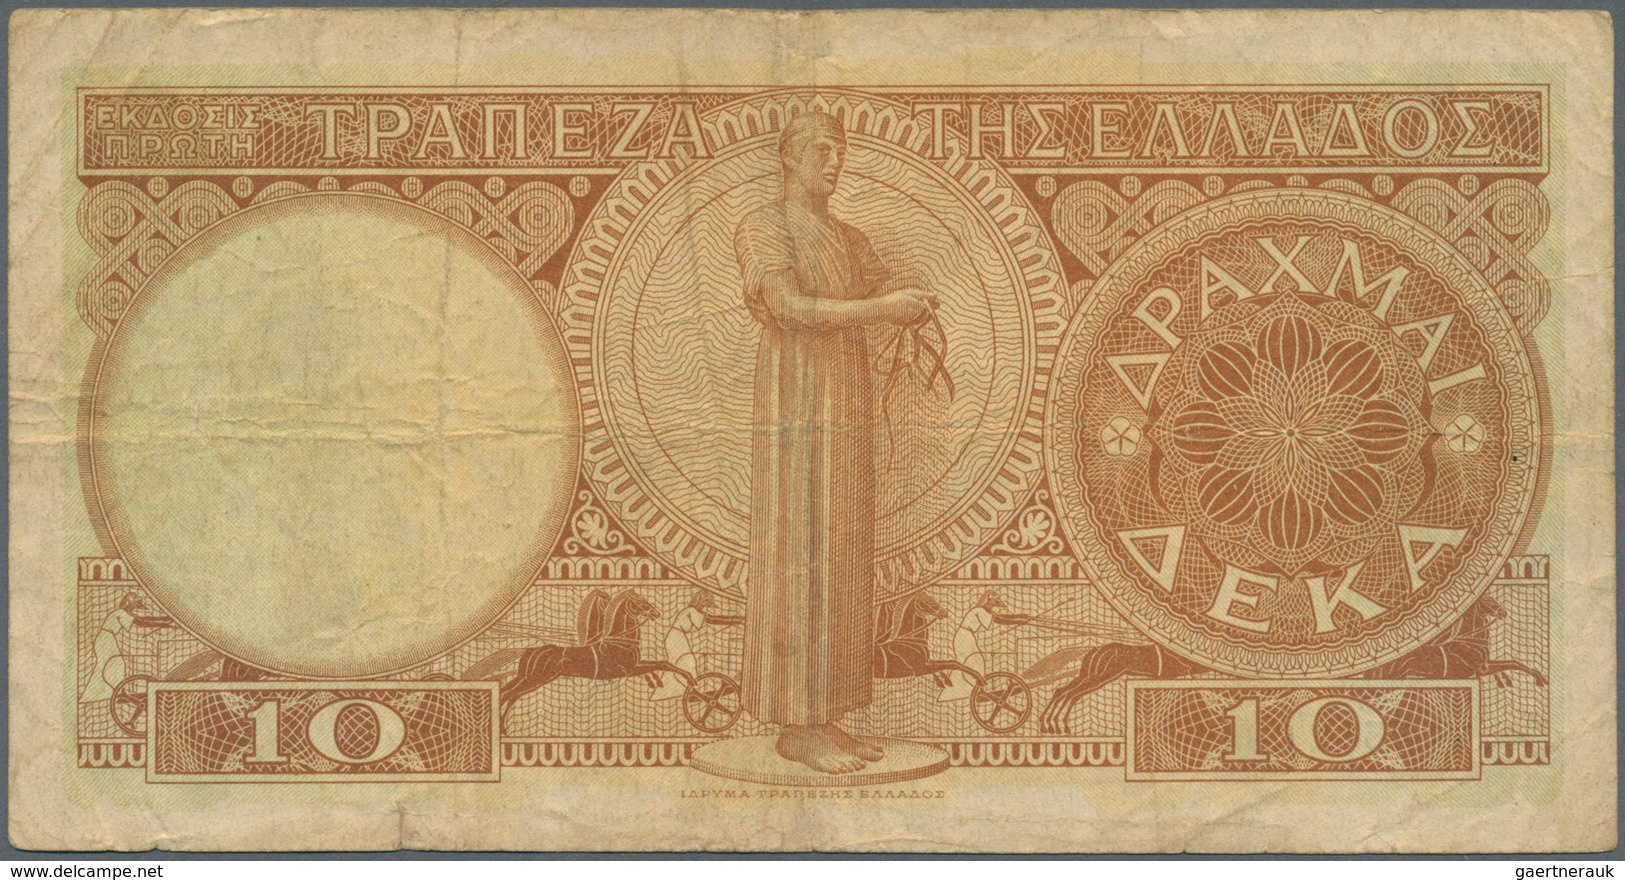 01643 Greece / Griechenland: 10 Drachmai 1954 P. 186a, Used With Several Folds, Stained Paper, Small Pen W - Grecia